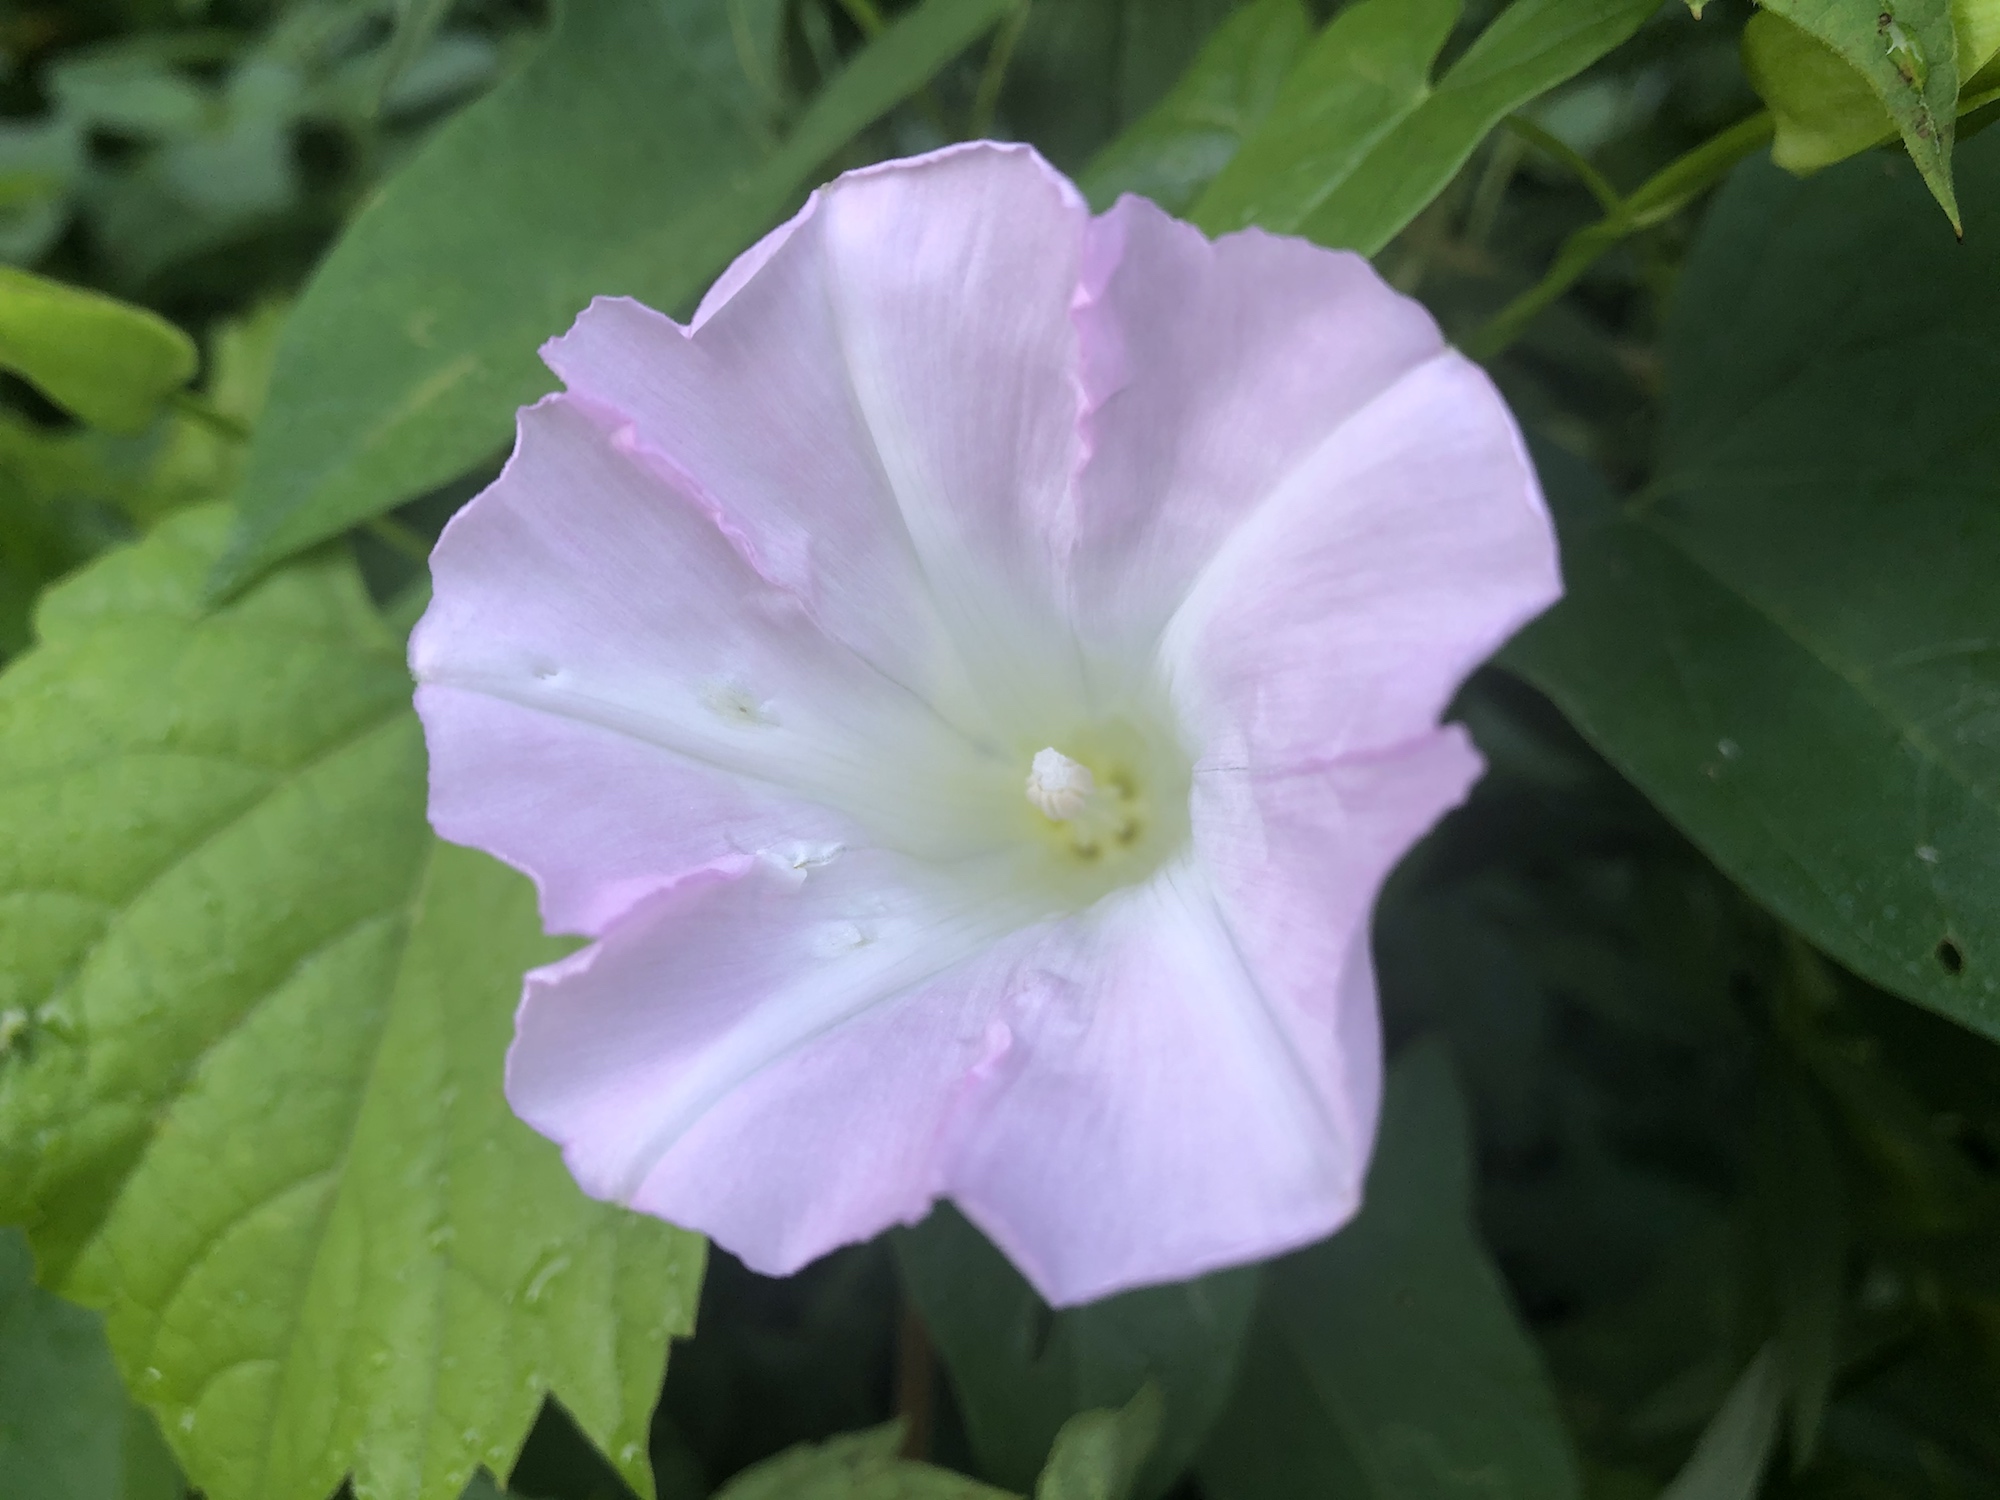 Hedge Bindweed on shore of Marion Dunn Pond in Madison, Wisconsin on July 24, 2020.